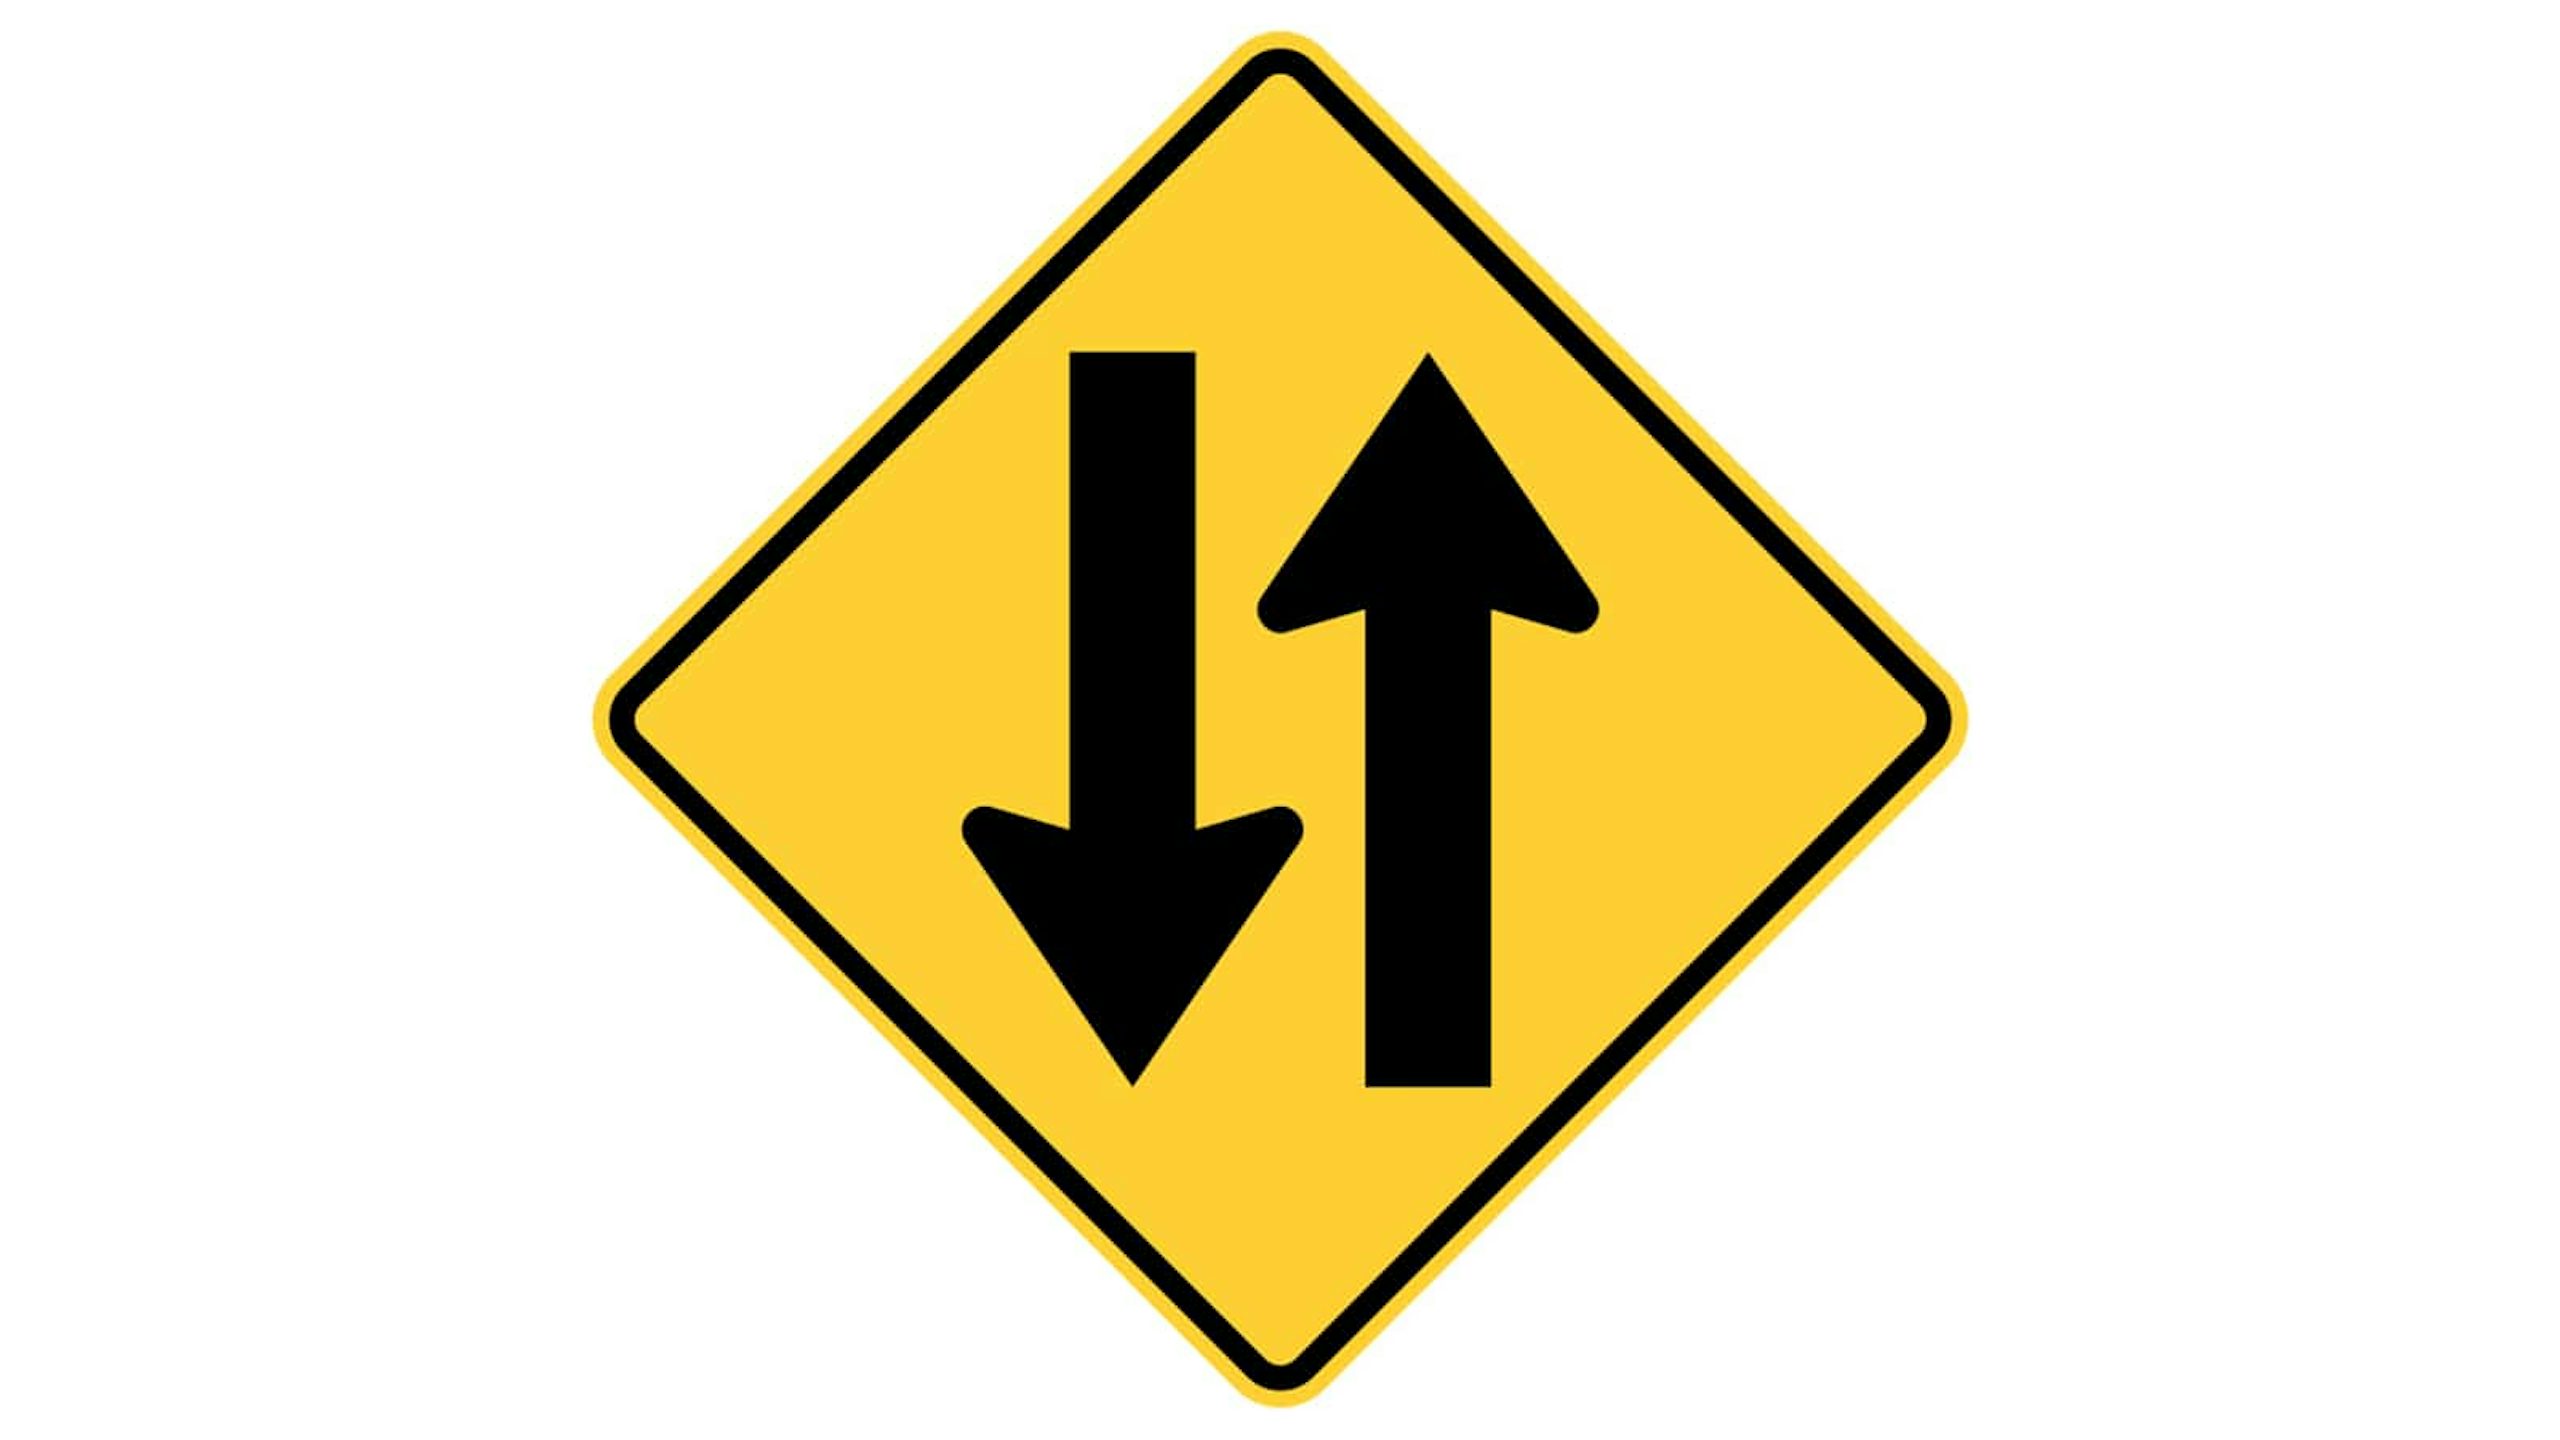 caution road signs